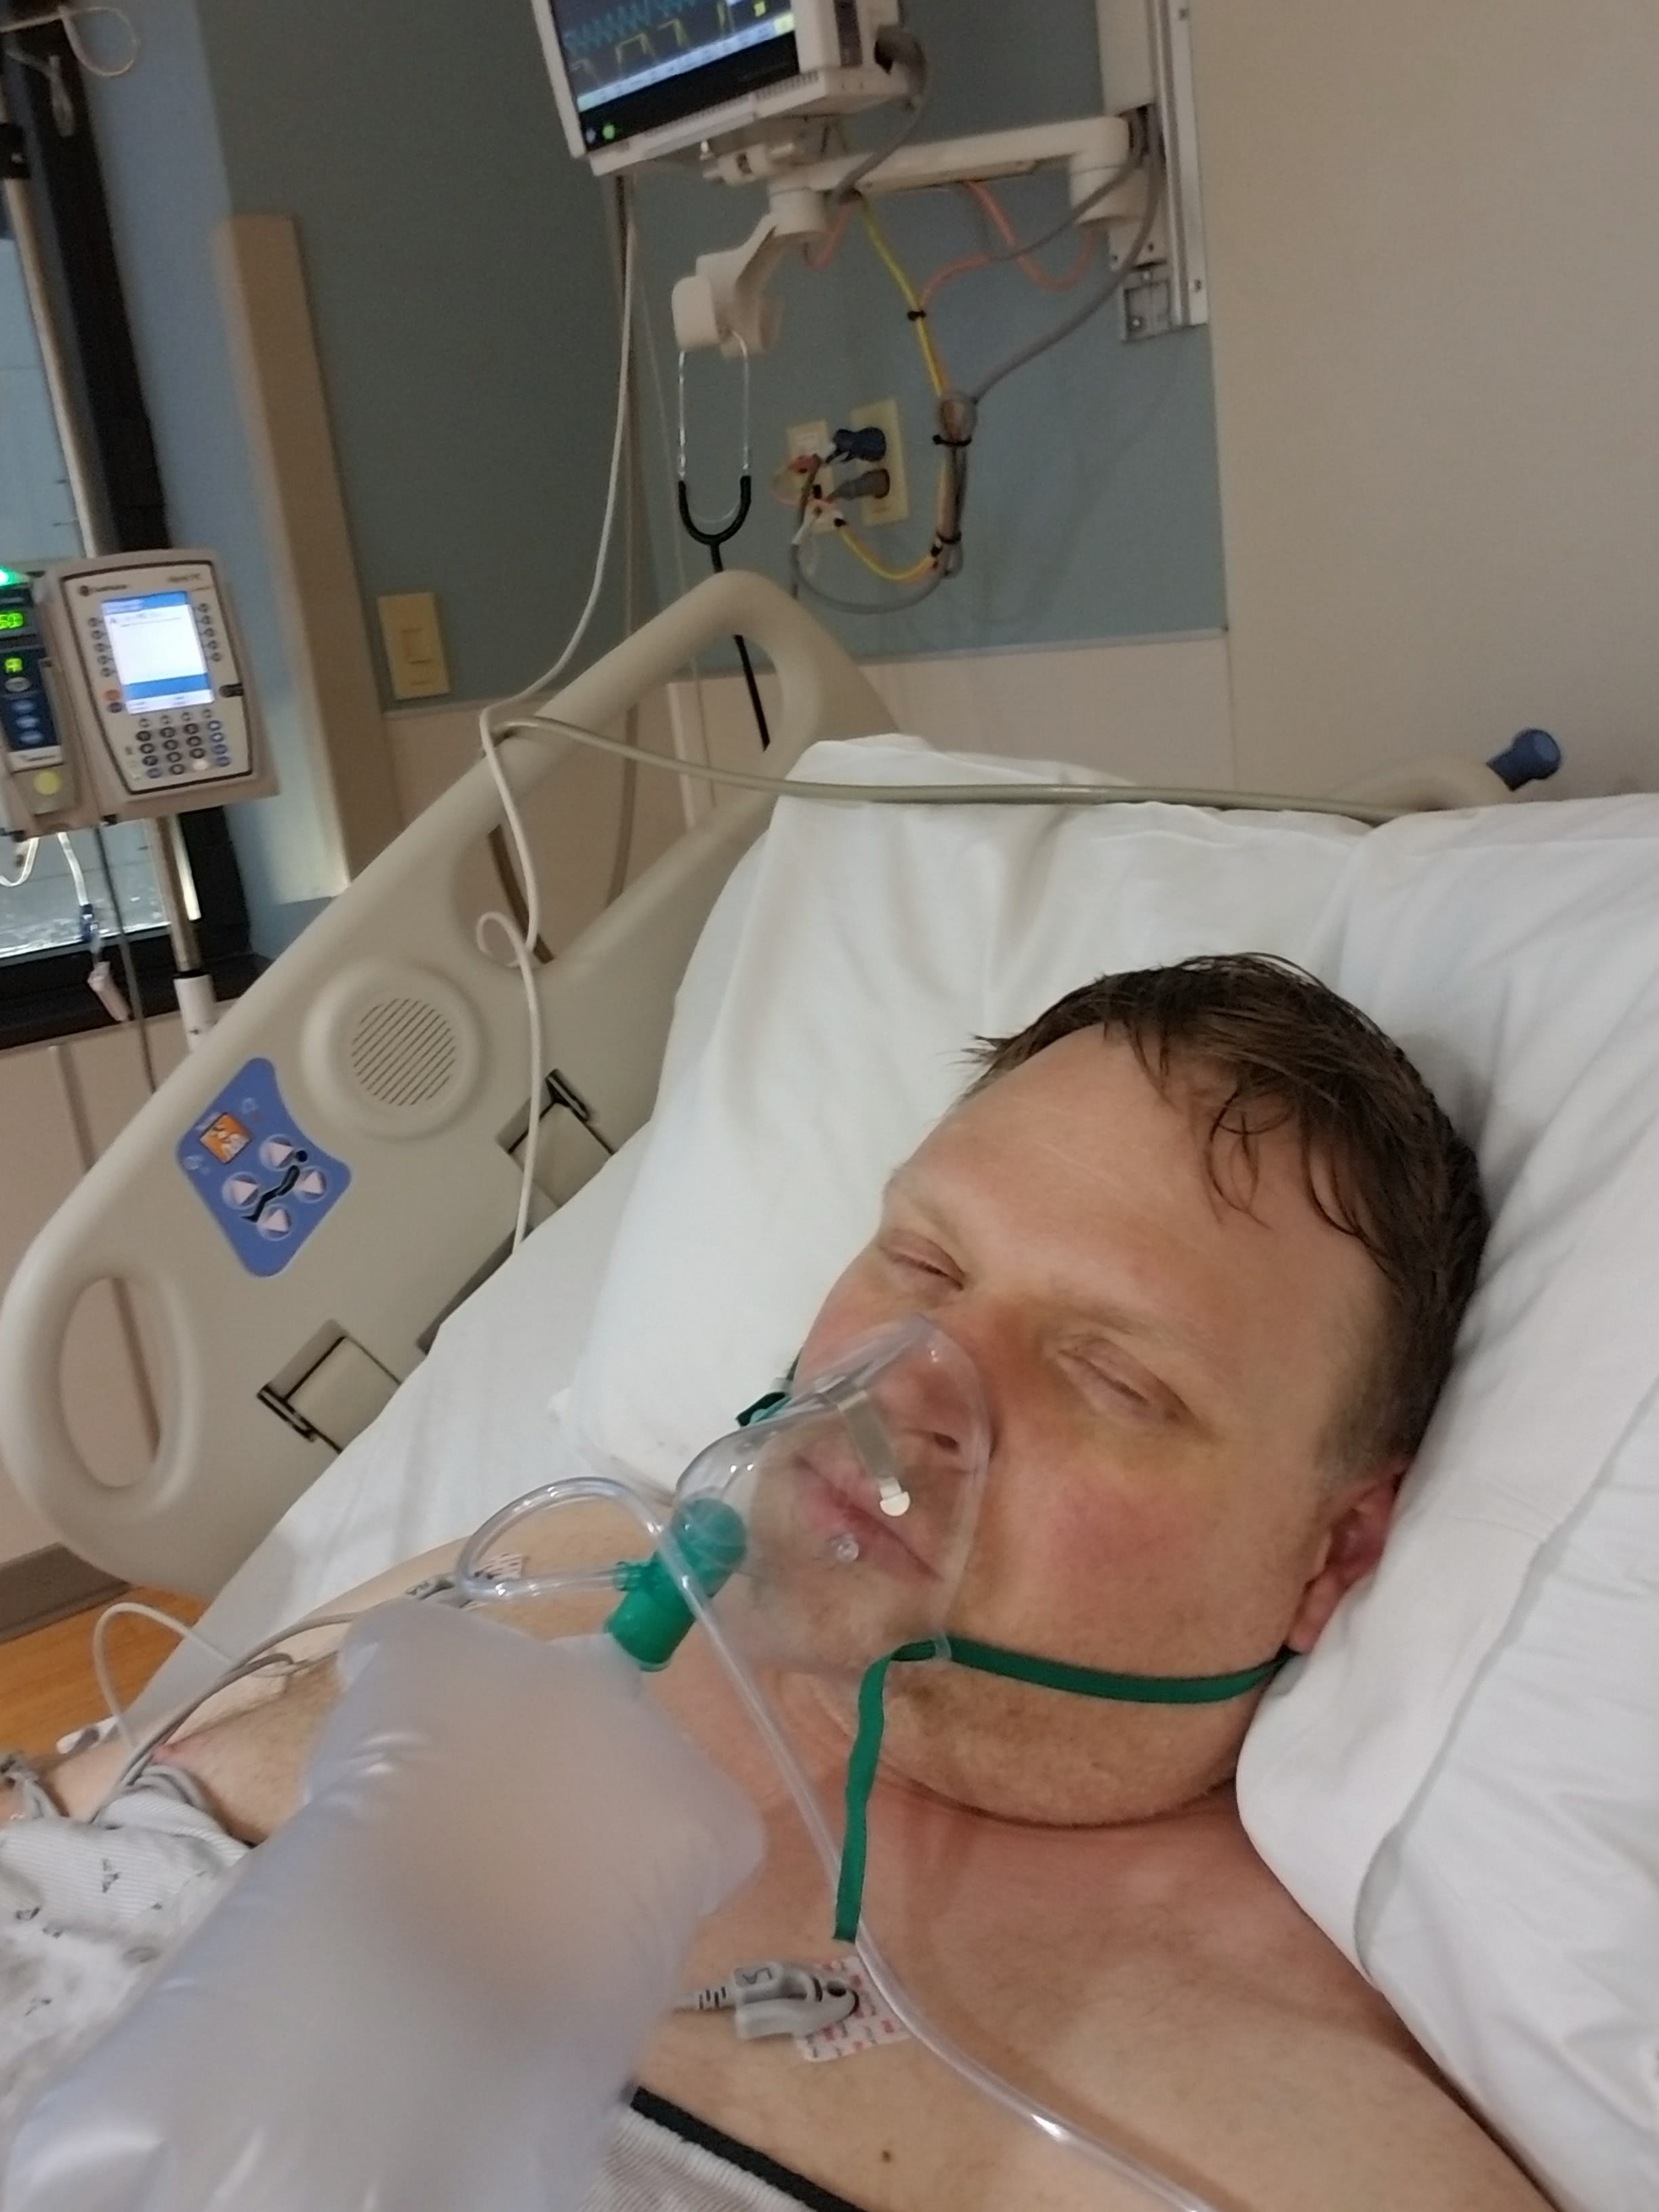 Eric Goedge, 48, spent more than a week hospitalized with coronavirus. When the Berkely man got home, he realized he couldn't walk up his stairs without help.